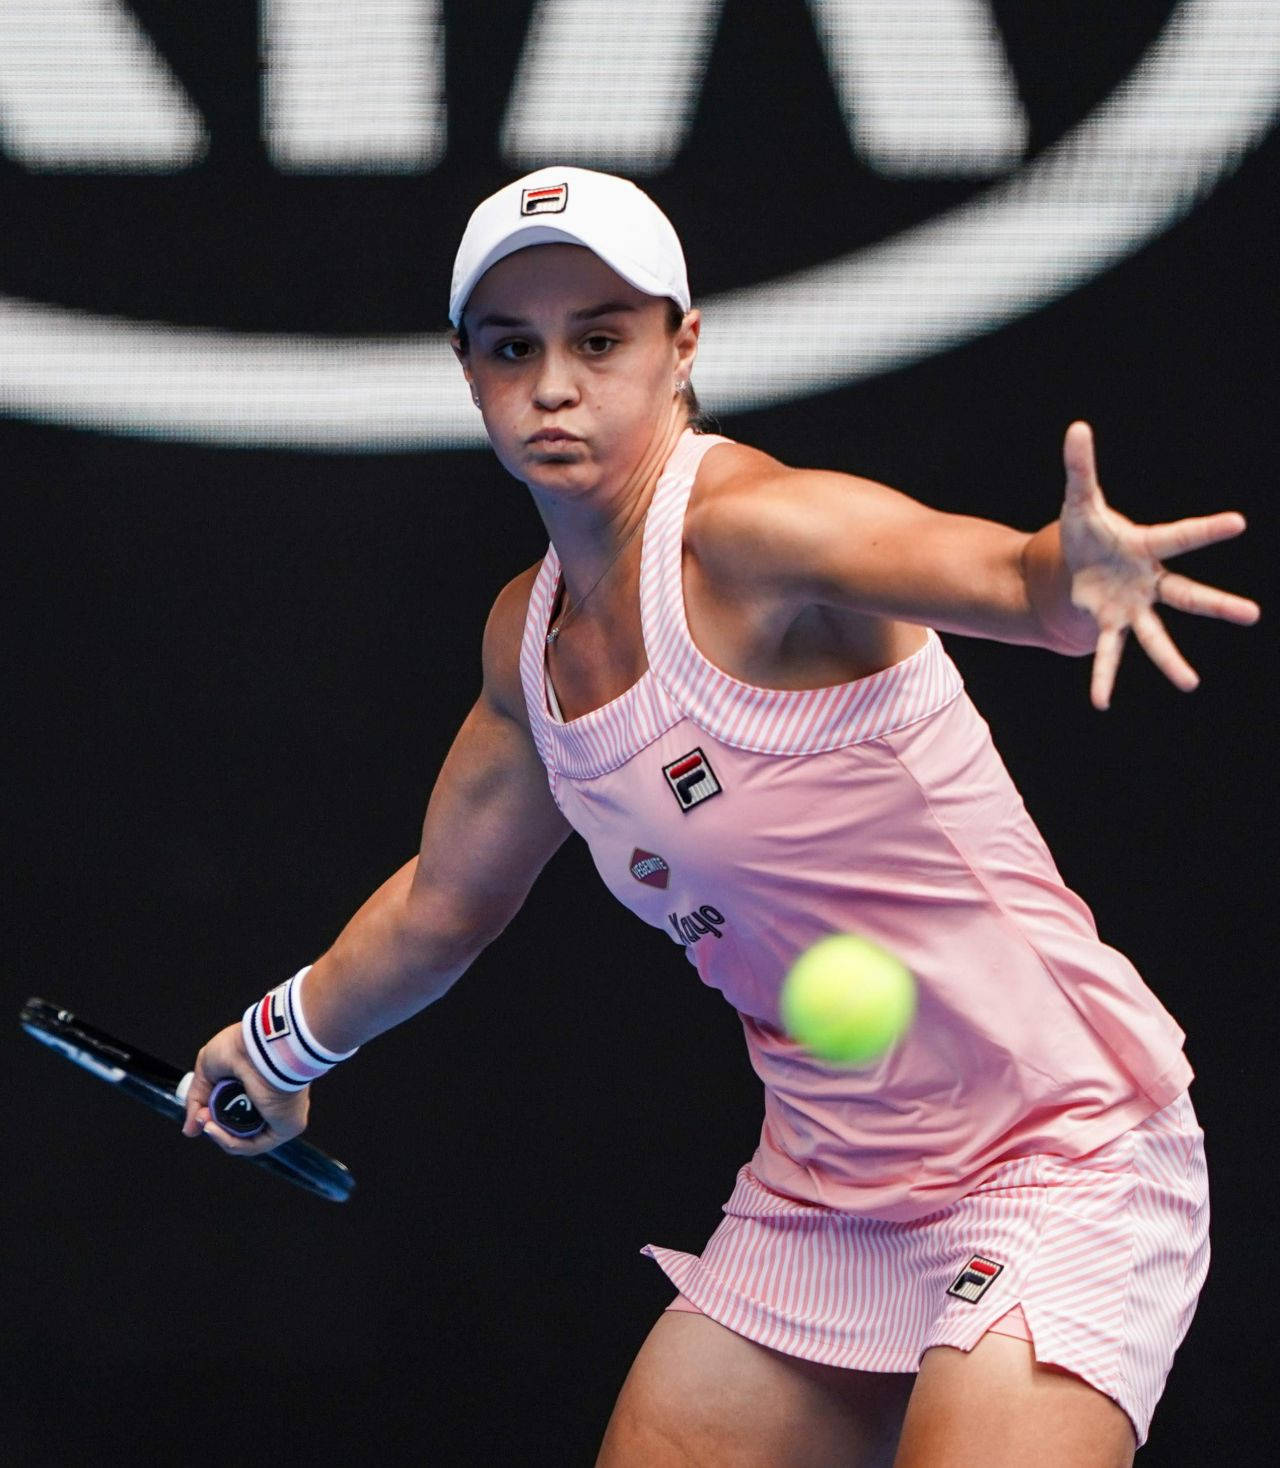 Caption: Ashleigh Barty in Action During Tennis Match Wallpaper